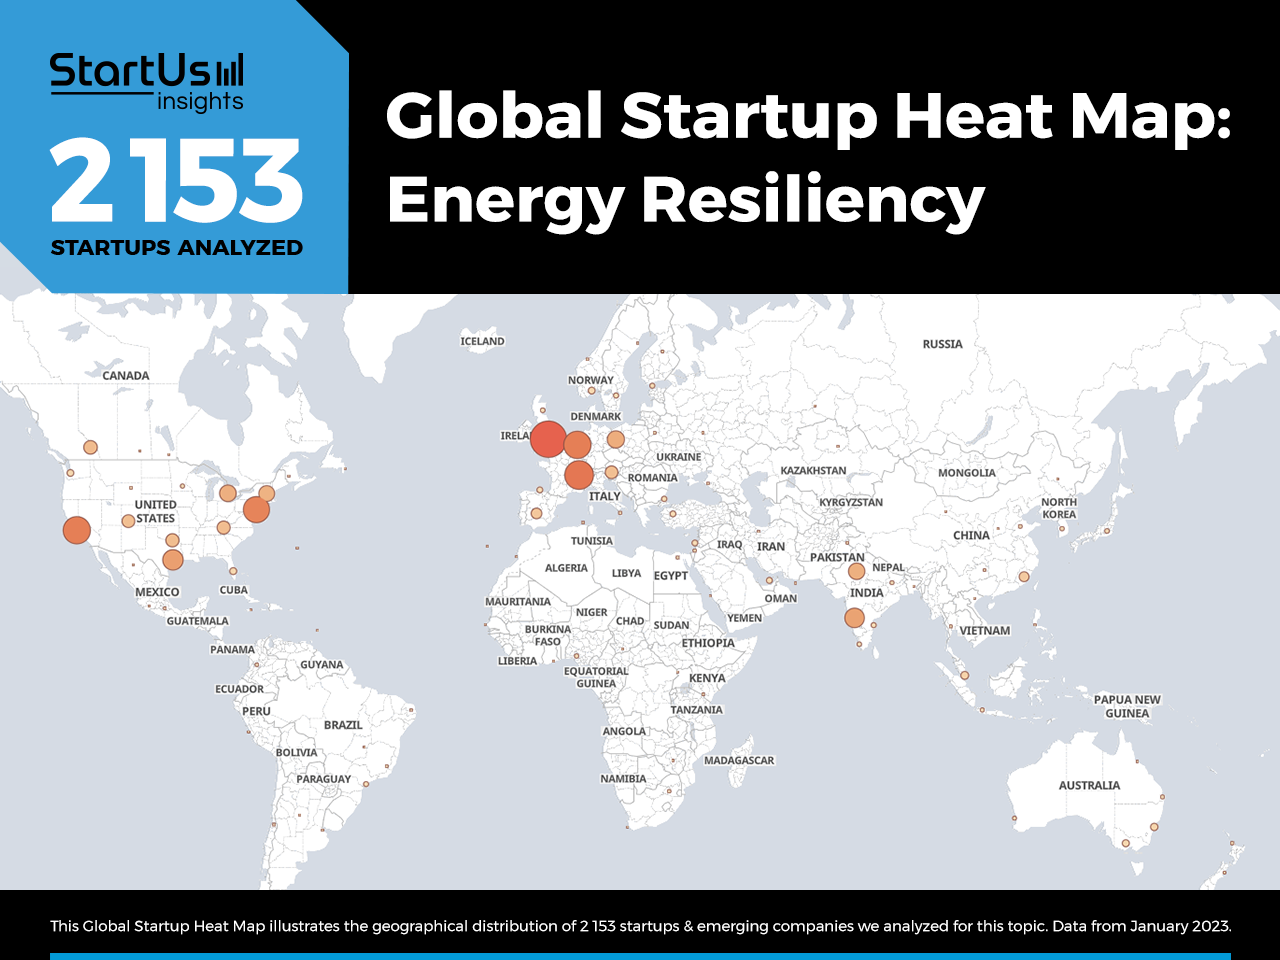 Examples-of-Energy-Resilience-Heat-Map-StartUs-Insights-noresize